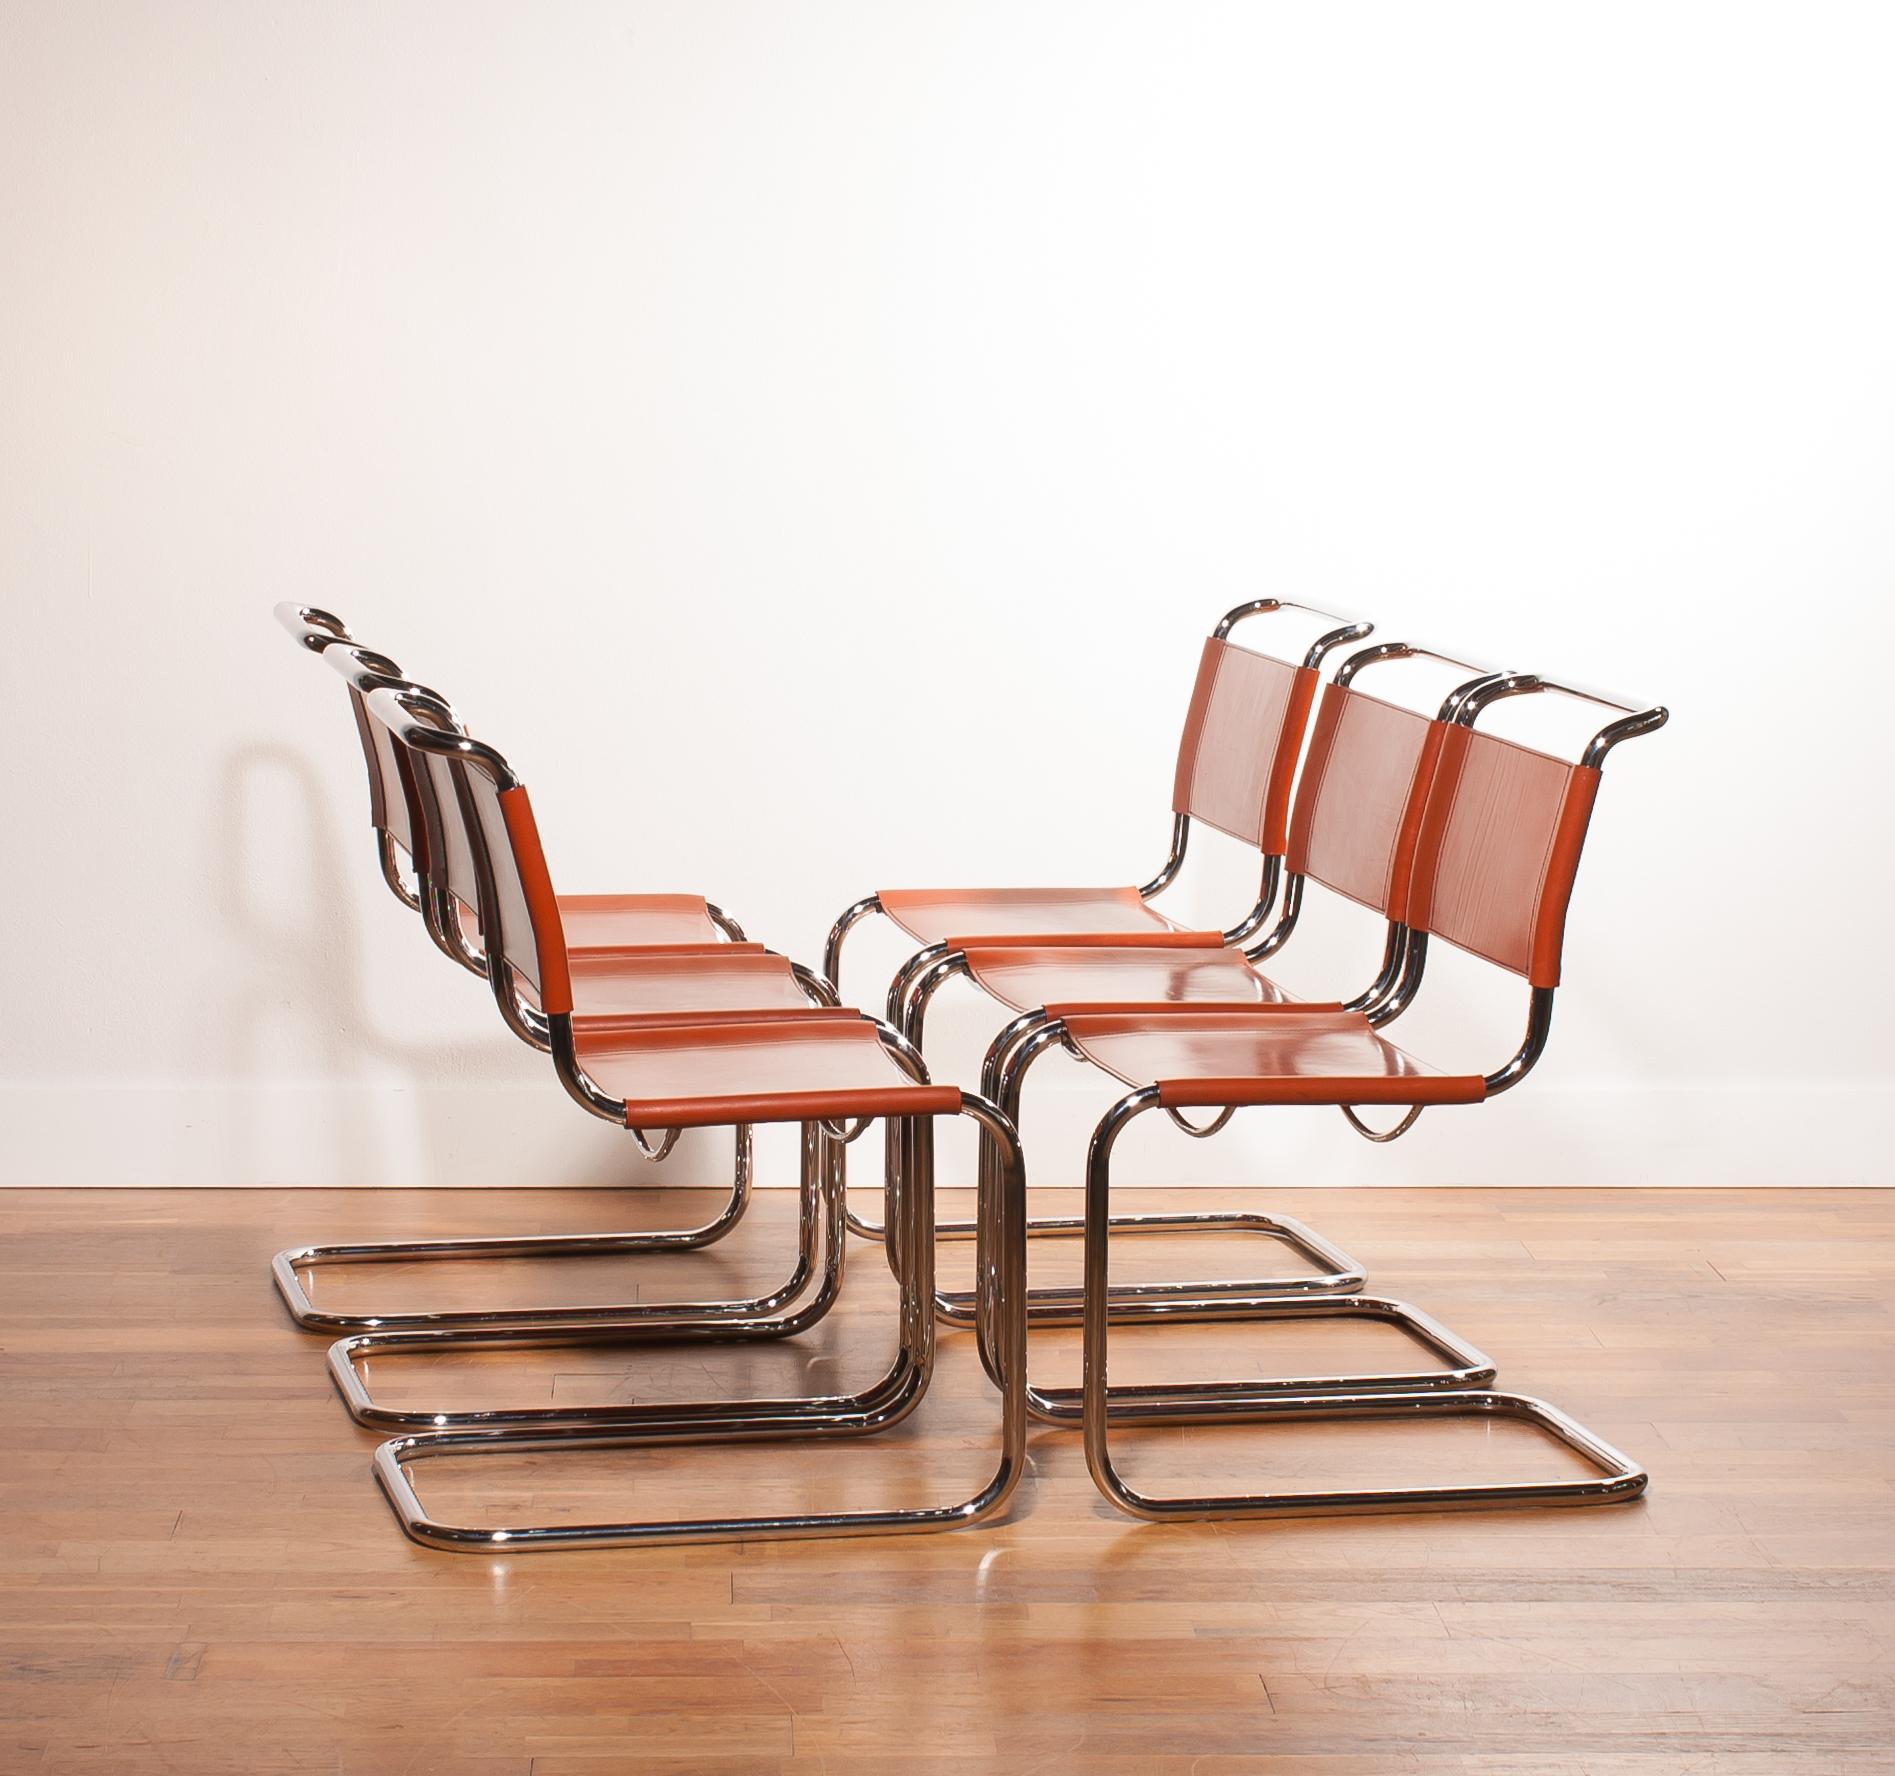 Late 20th Century Chrome Set of Six Tubular Dining Chairs by Mart Stam for Fasem in Cognac Leather